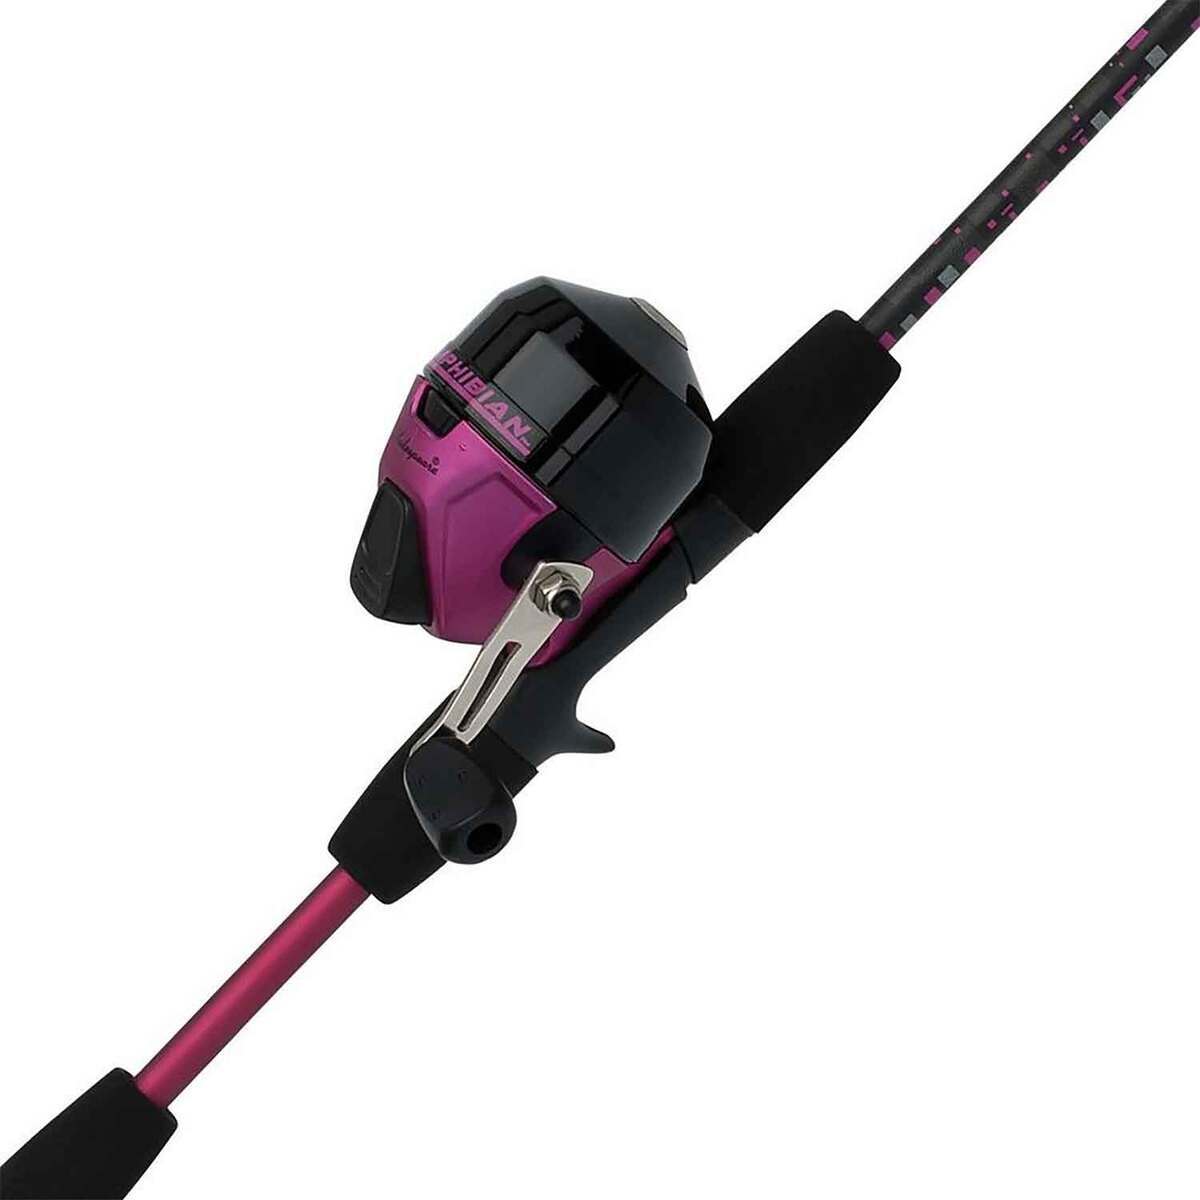 Shakespeare Amphibian Spincast Rod and Reel Combo - 5ft 6in